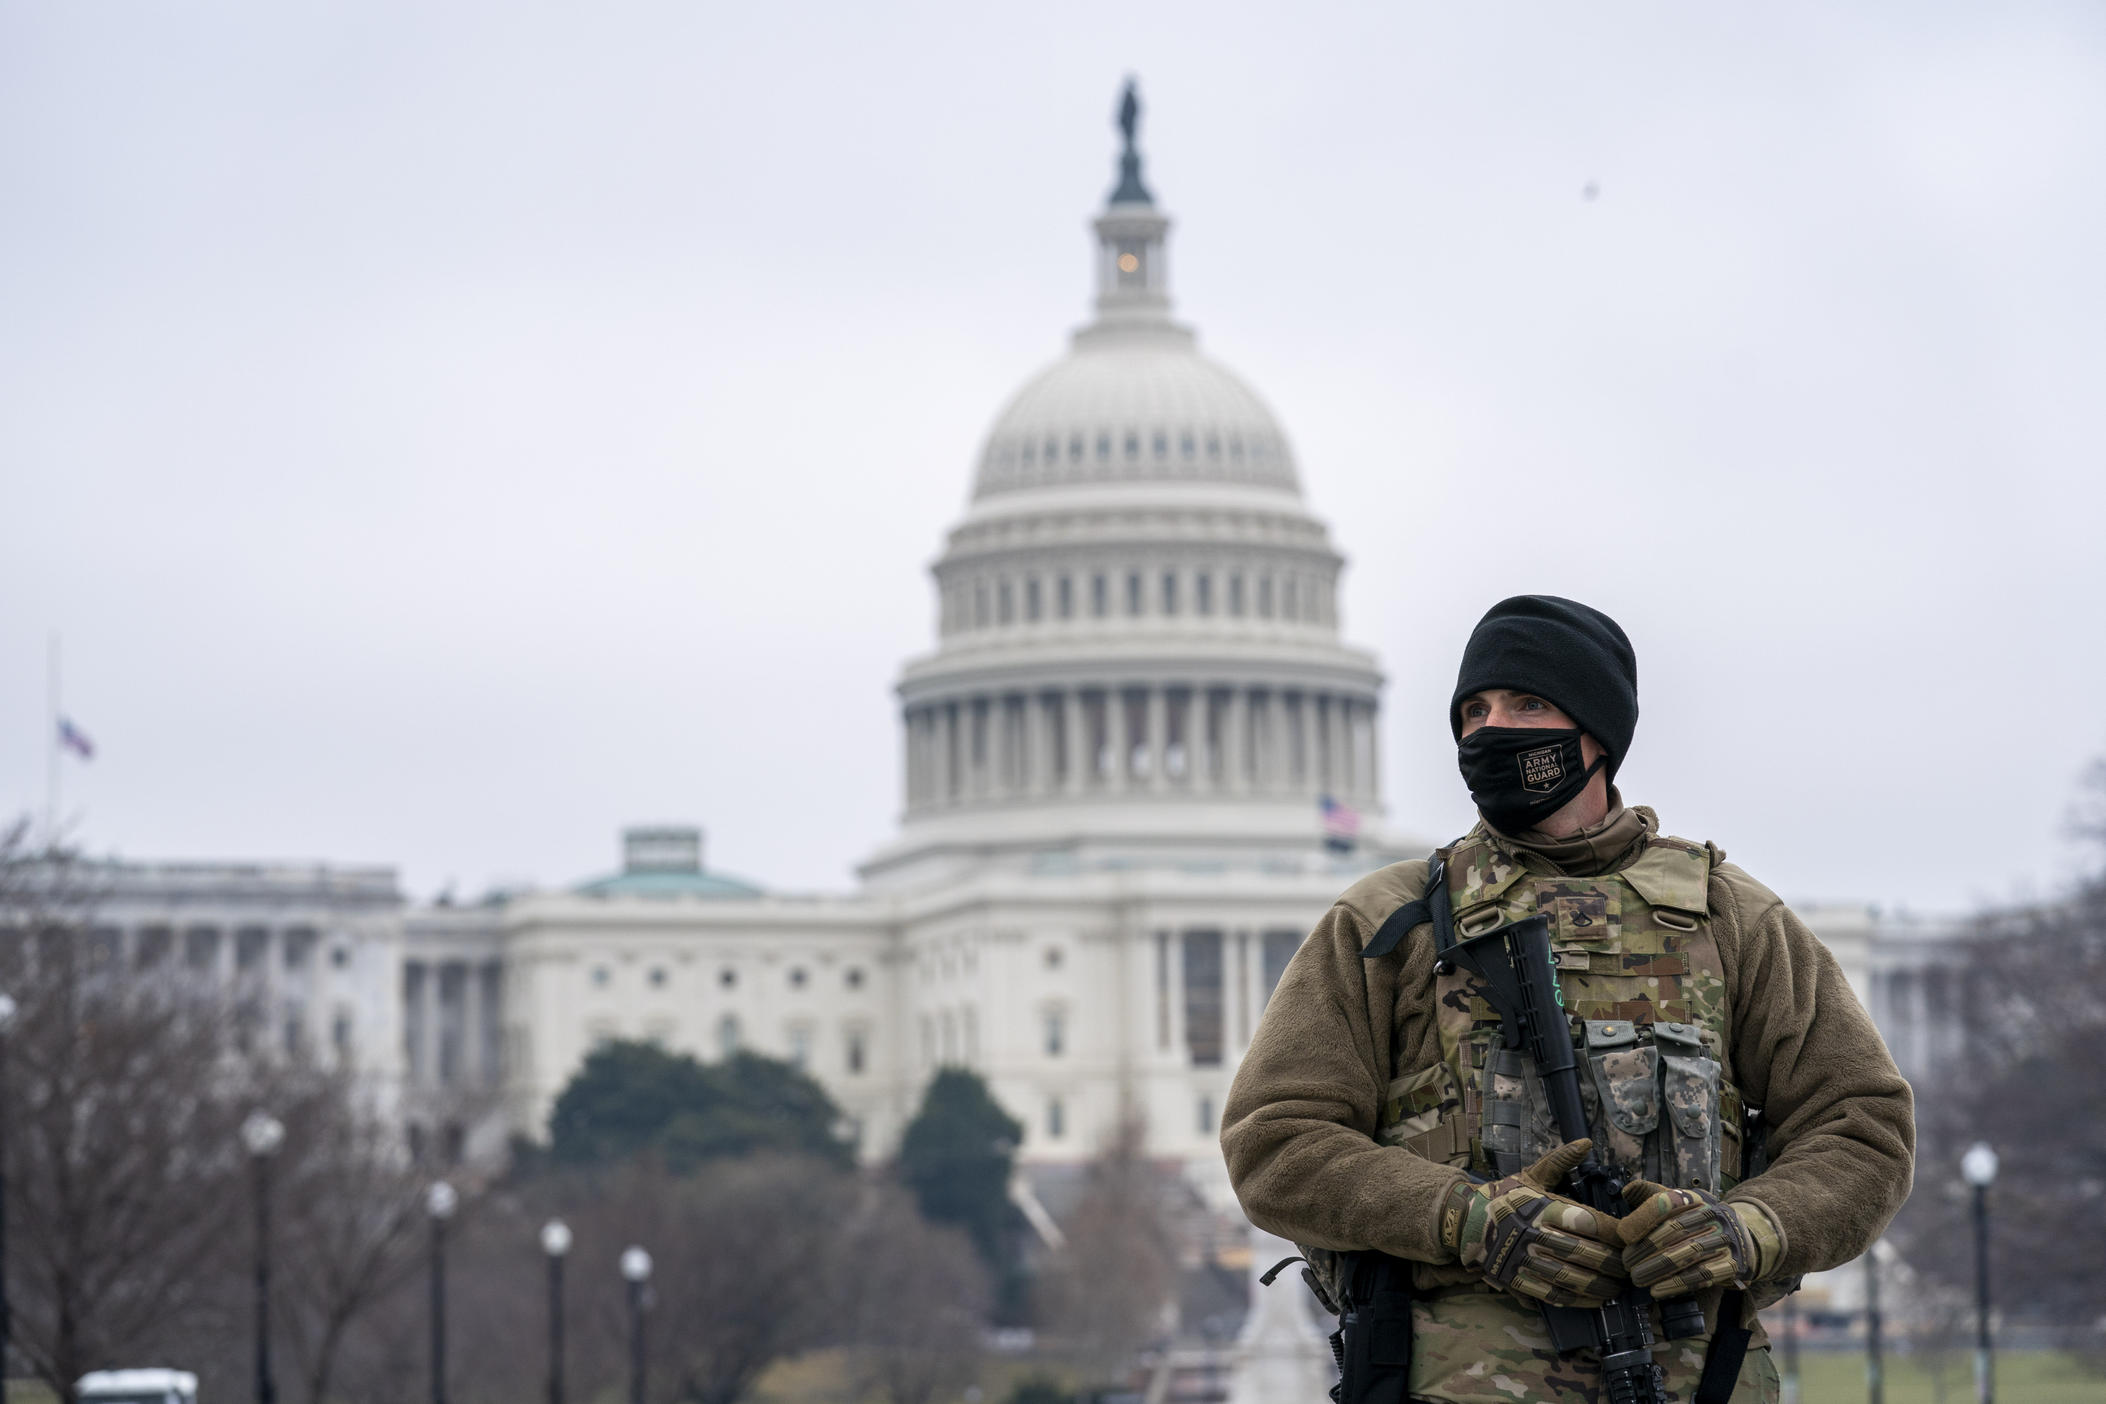 Member of the national guard patrol the area outside of the U.S. Capitol on the third day of the impeachment trial of former President Donald Trump at Capitol Hill, in Washington, Thursday, Feb. 11, 2021. (AP Photo/Jose Luis Magana)